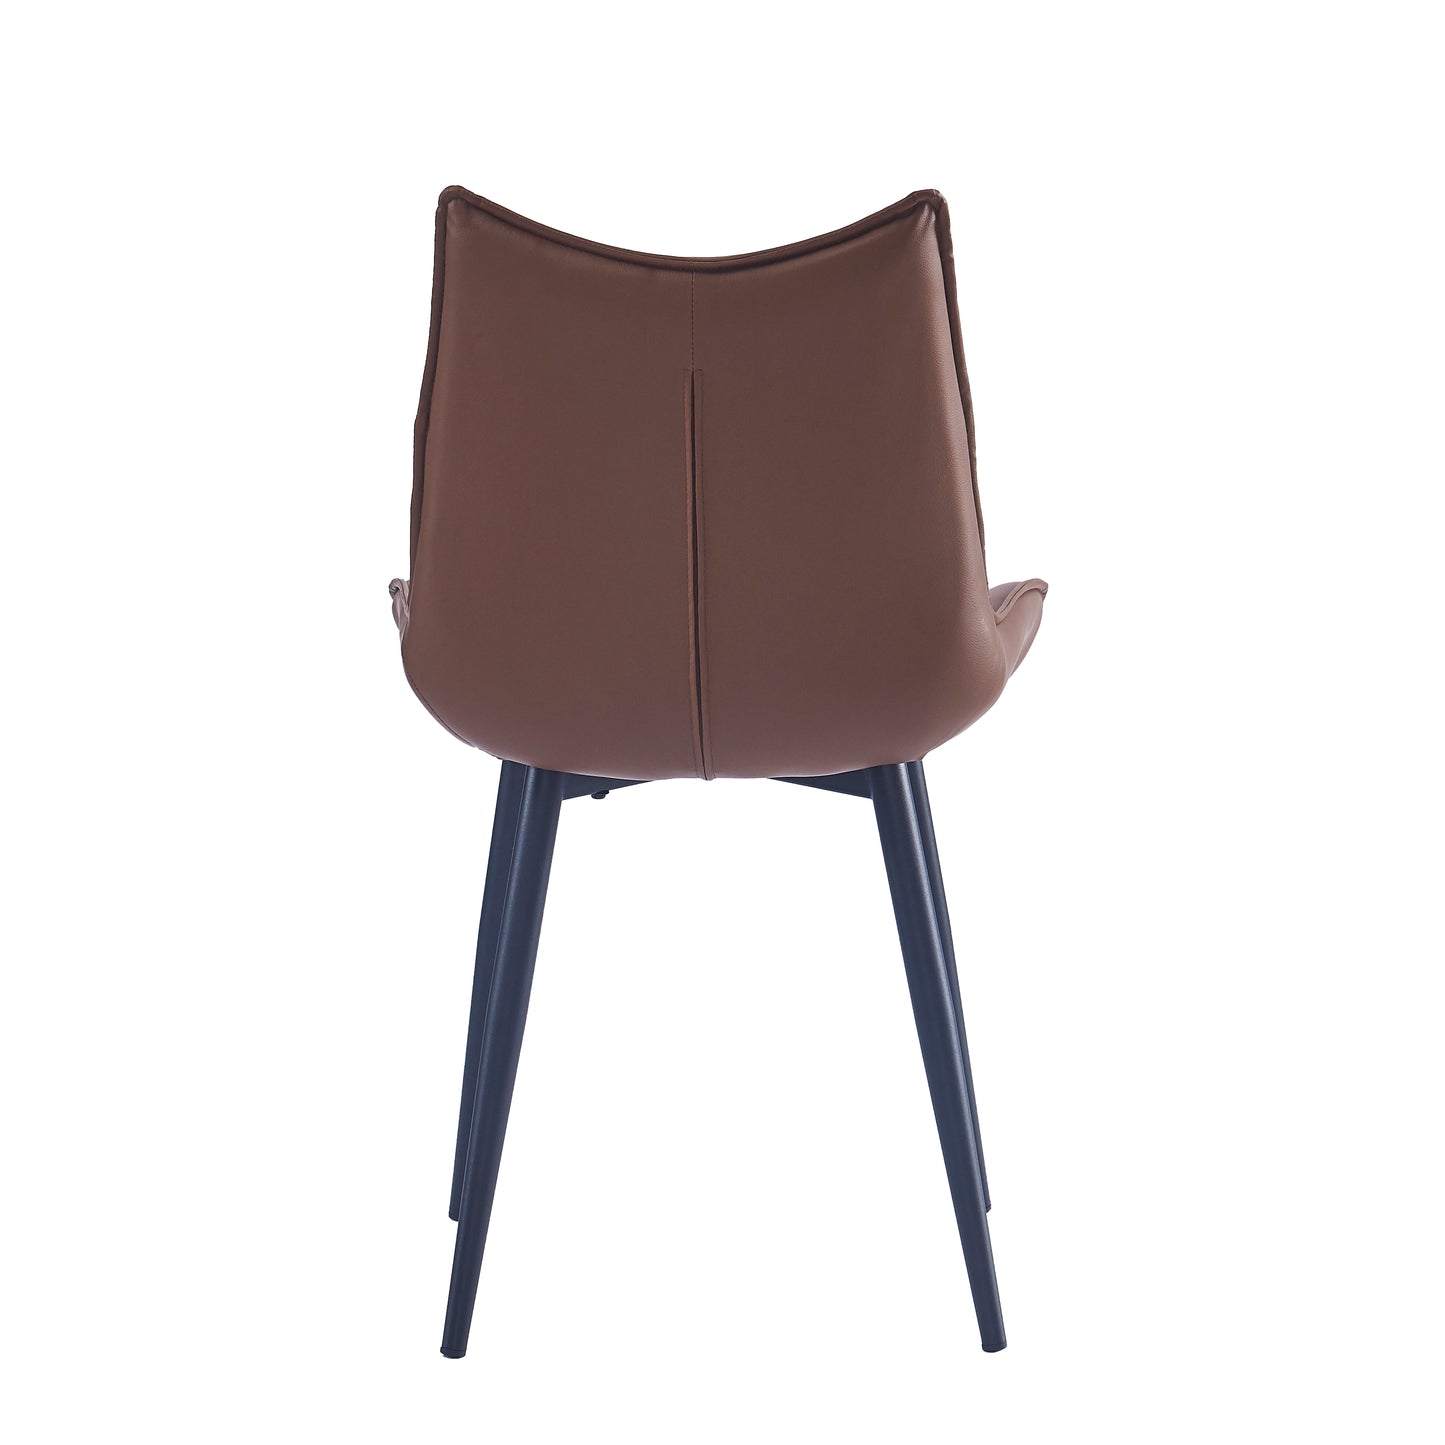 Criterion Jett Dining Chair 830mm PU Leather Cushioned Seat, Carbon Steel Frame Coffee